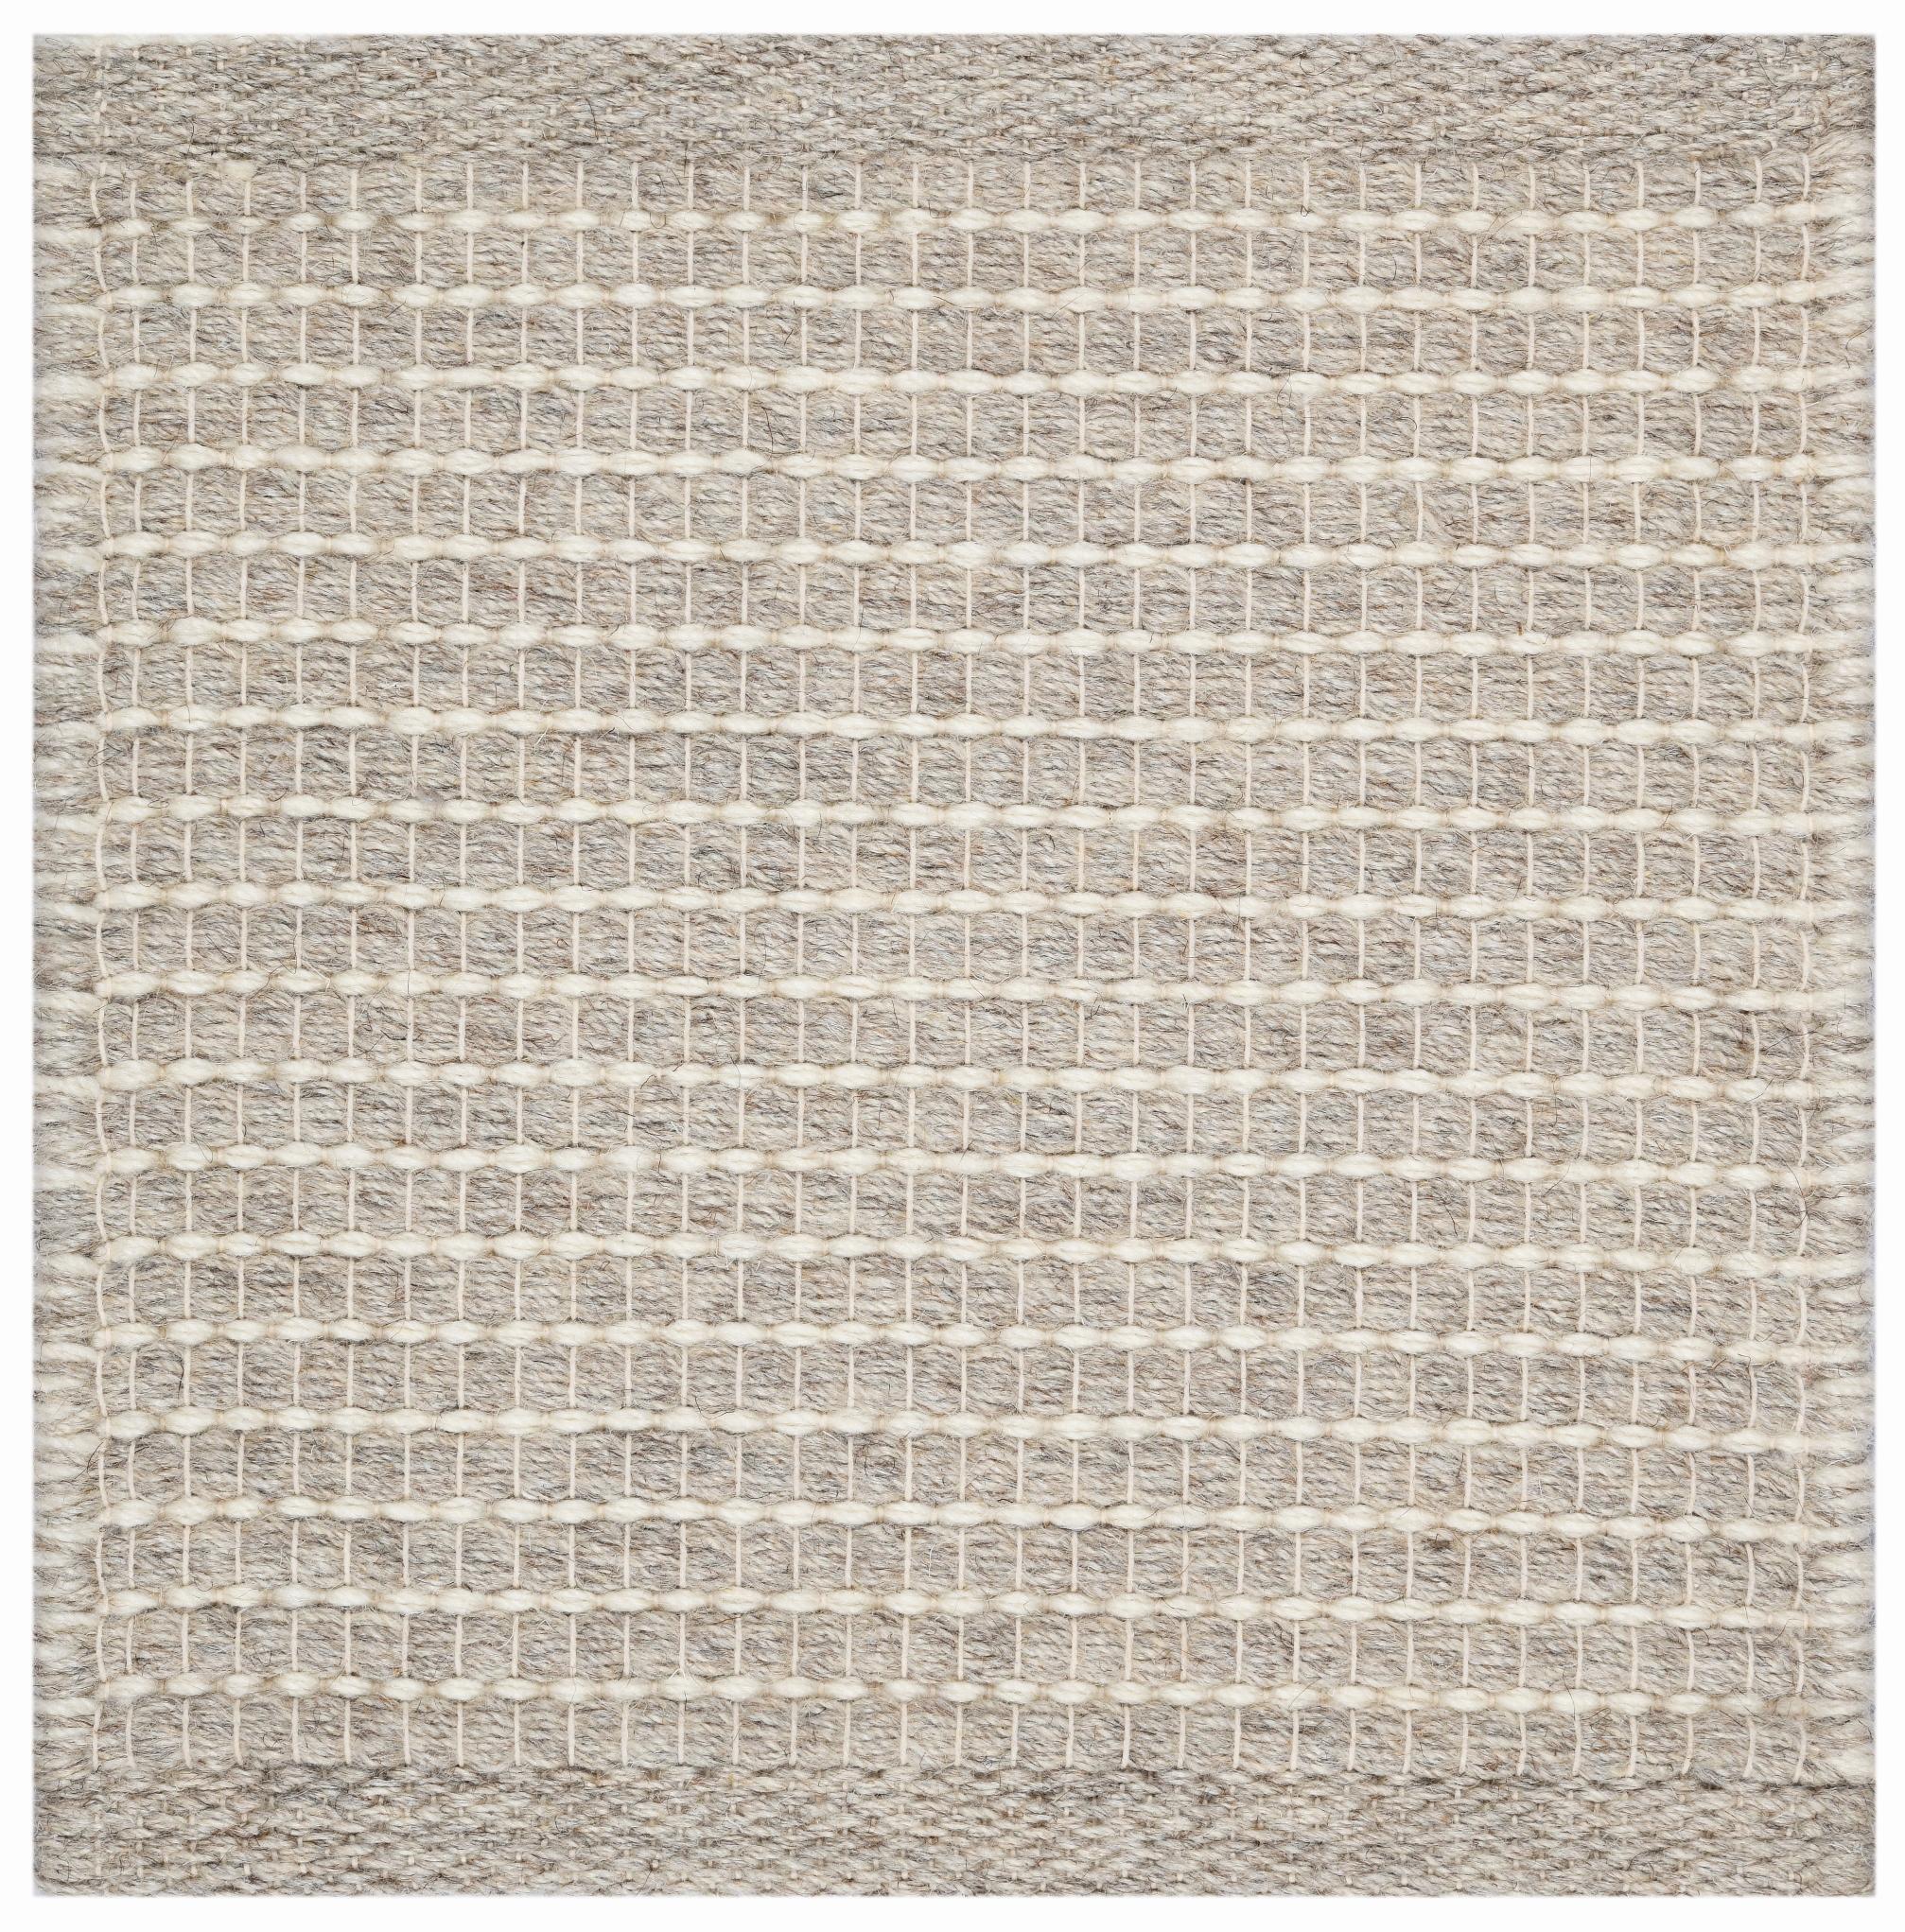 Lex, Ash, Handwoven Face 60% Undyed NZ Wool, 40% Undyed MED Wool, 8' x 10' In New Condition For Sale In New York, NY